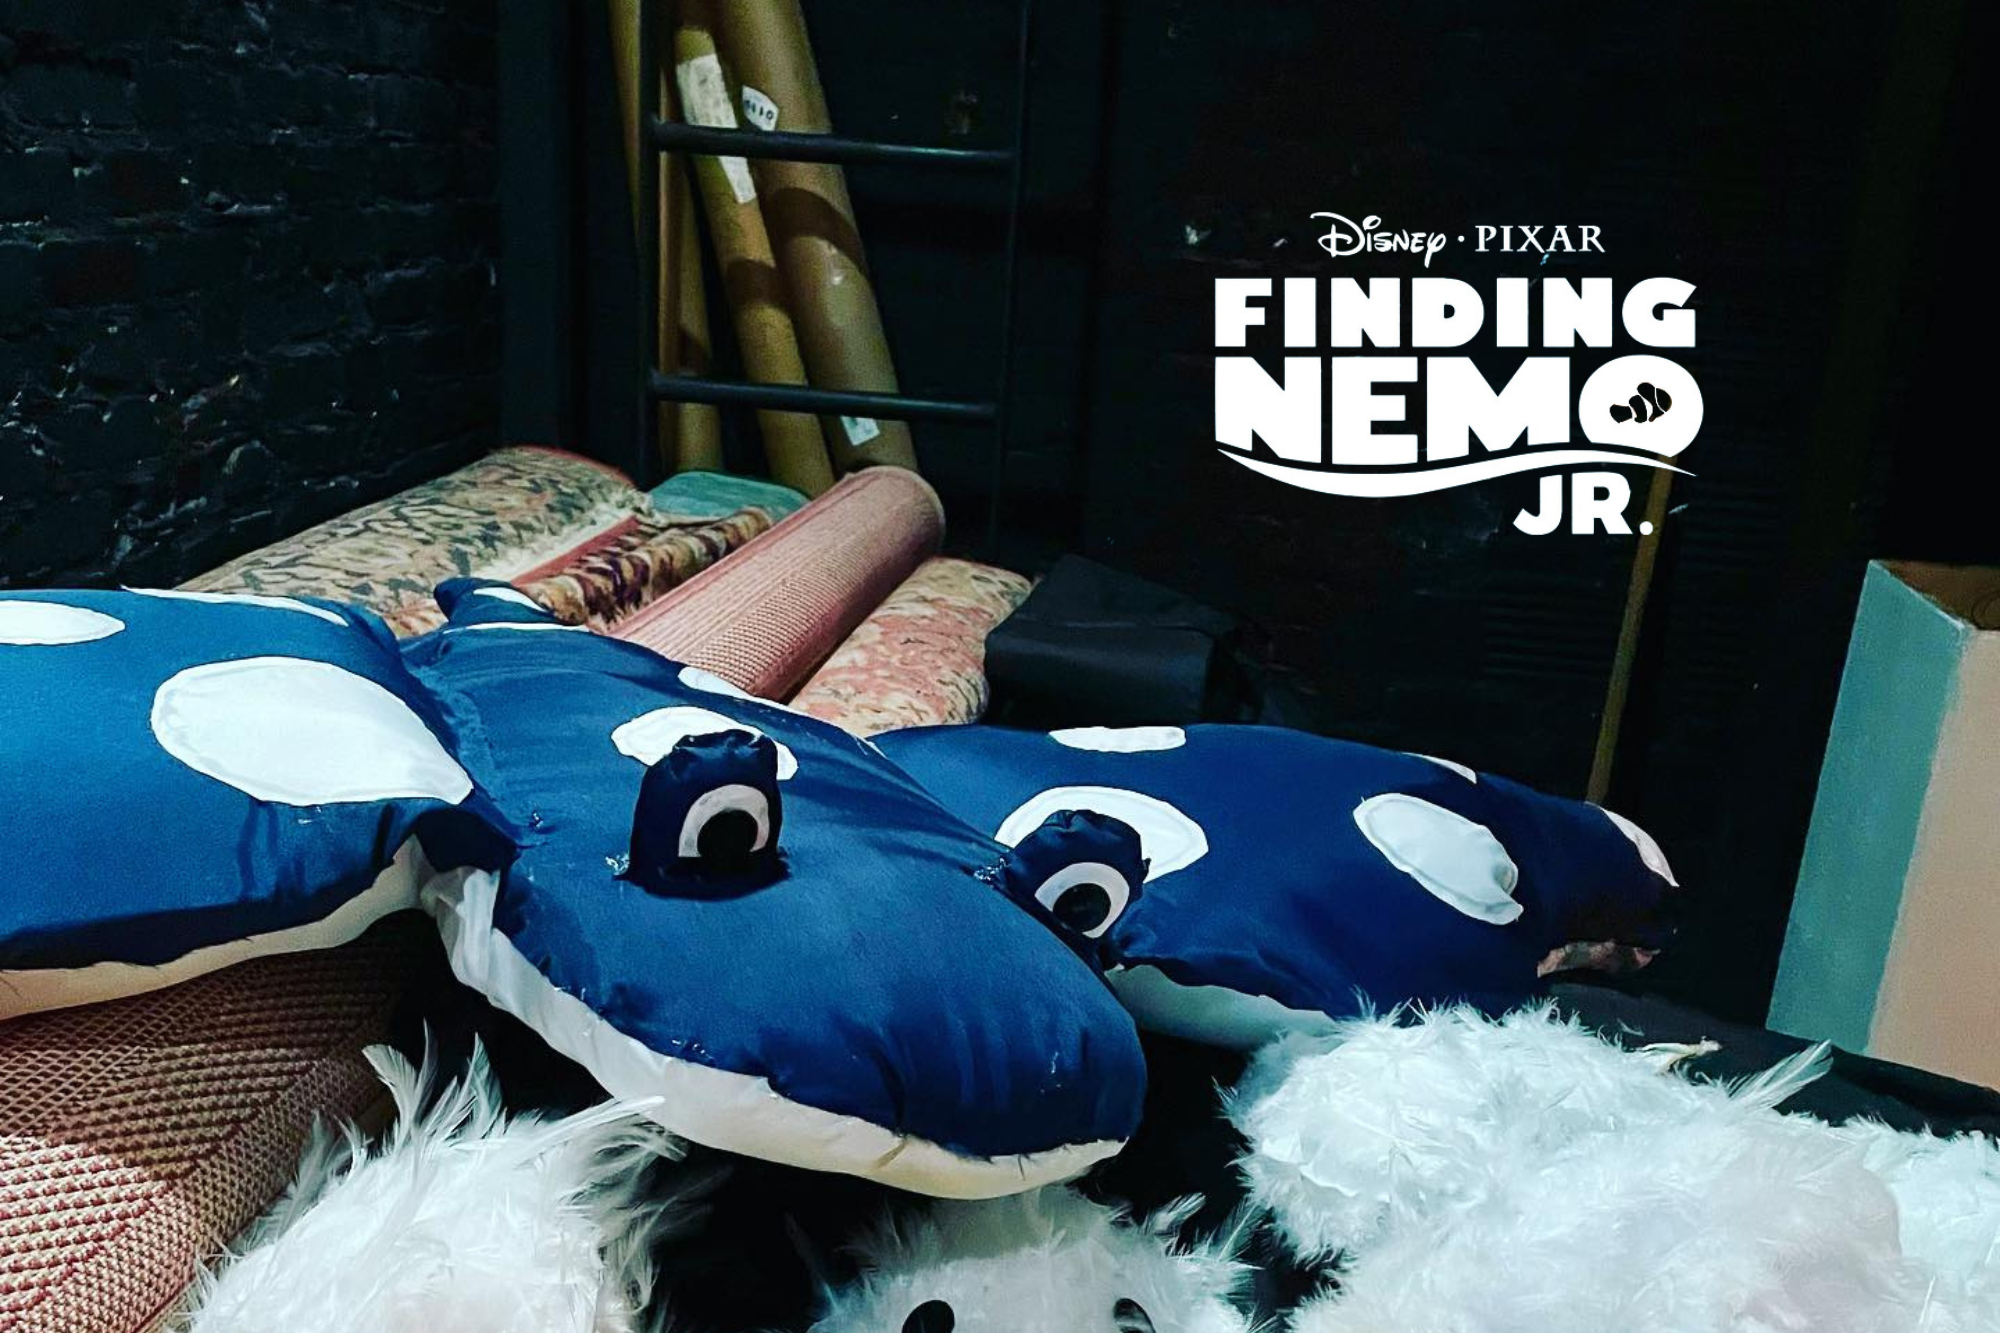 See swimmingly good young actors in Finding Nemo Jr. at the